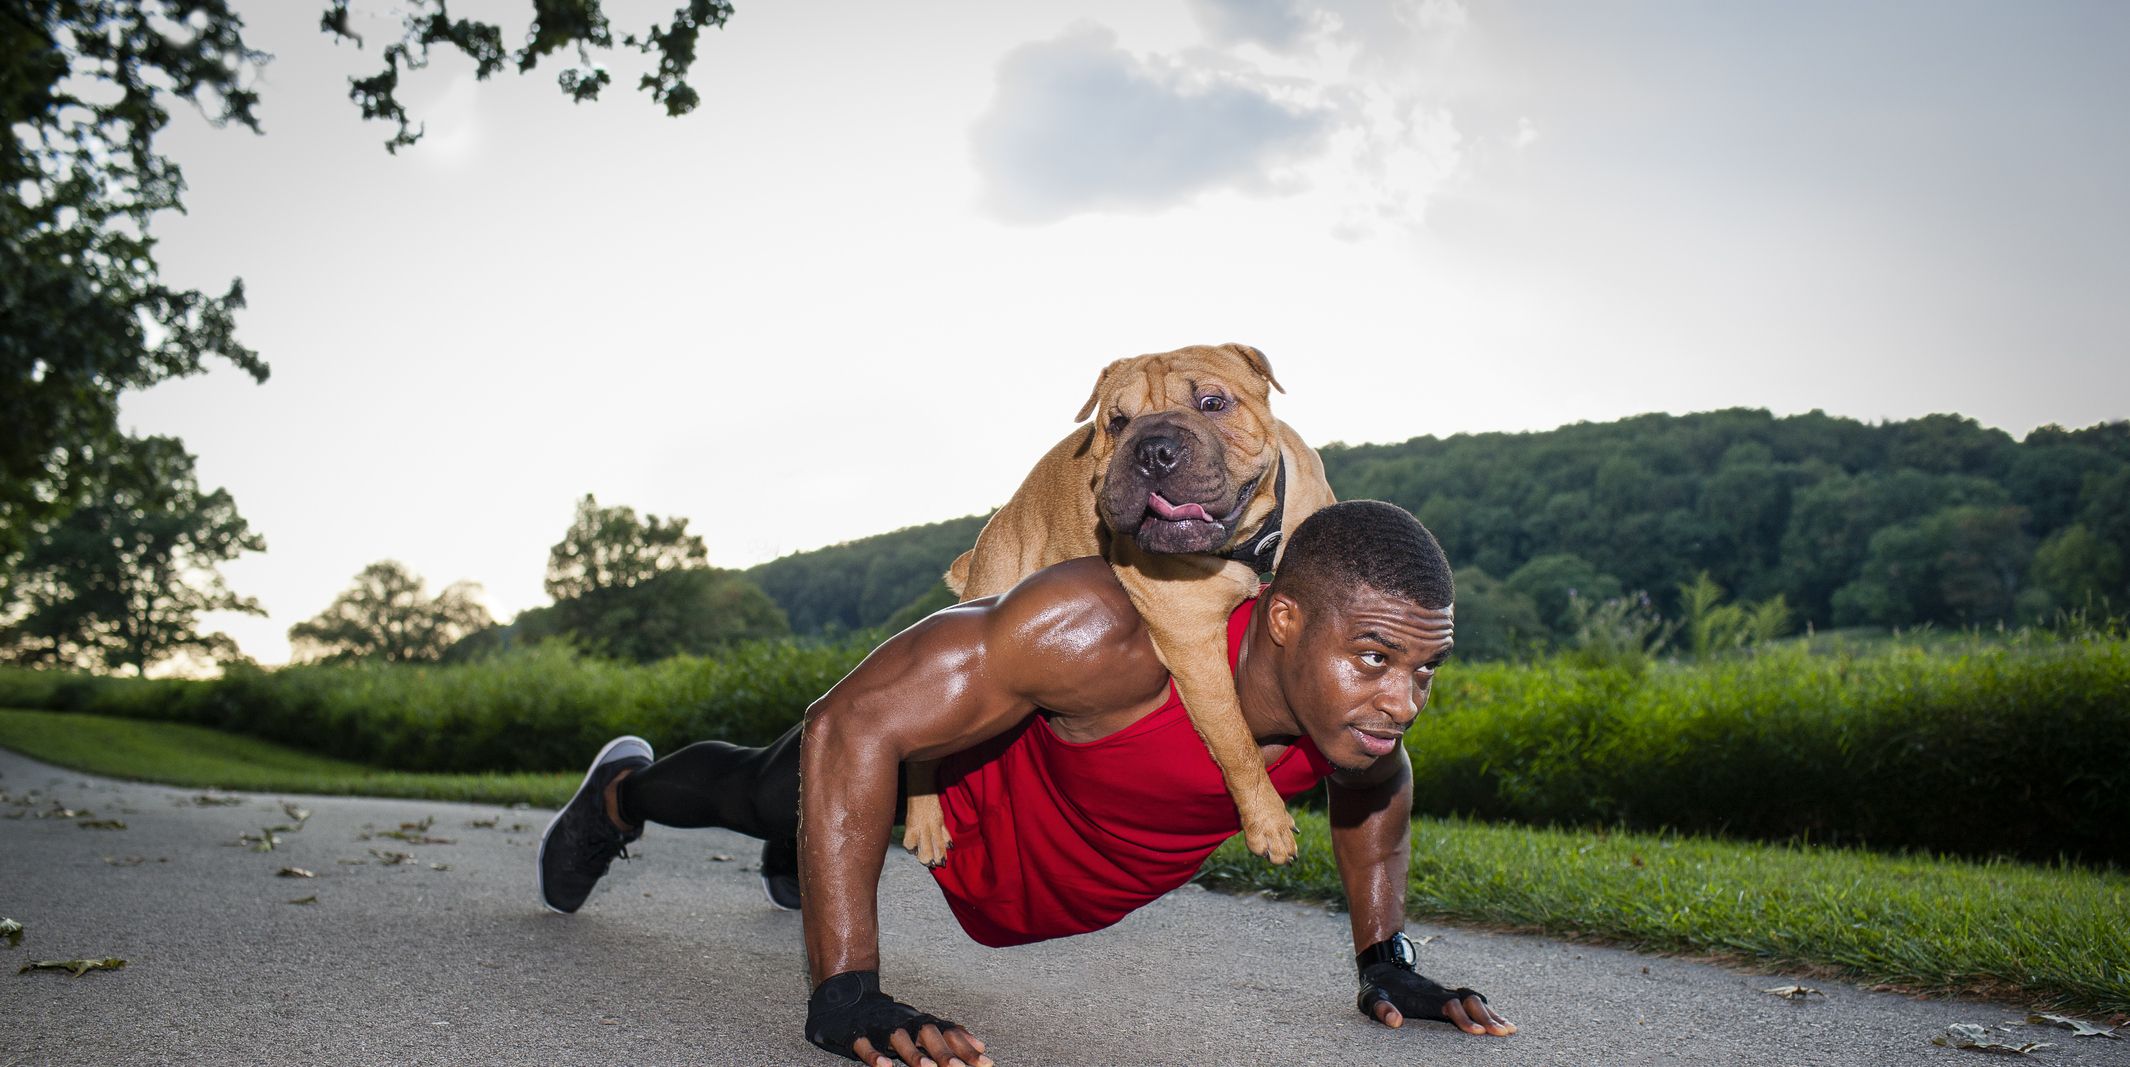 can you over exercise your dog